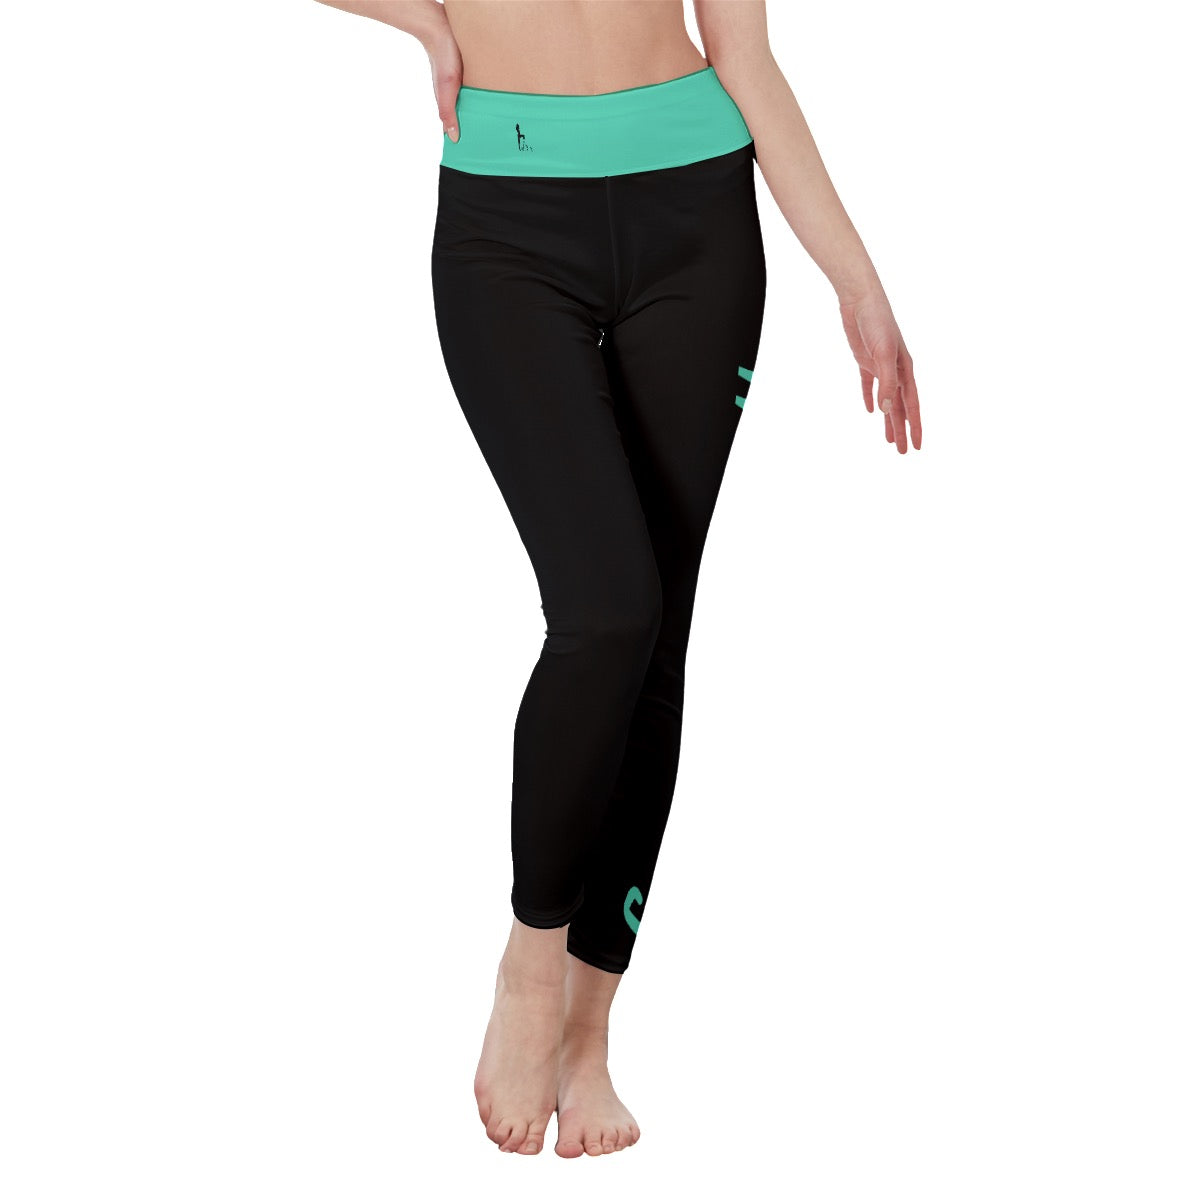 Officially Sexy Black Women's High Waist Leggings With  Turquoise Green Waist / Logo & Side Stitch Closure